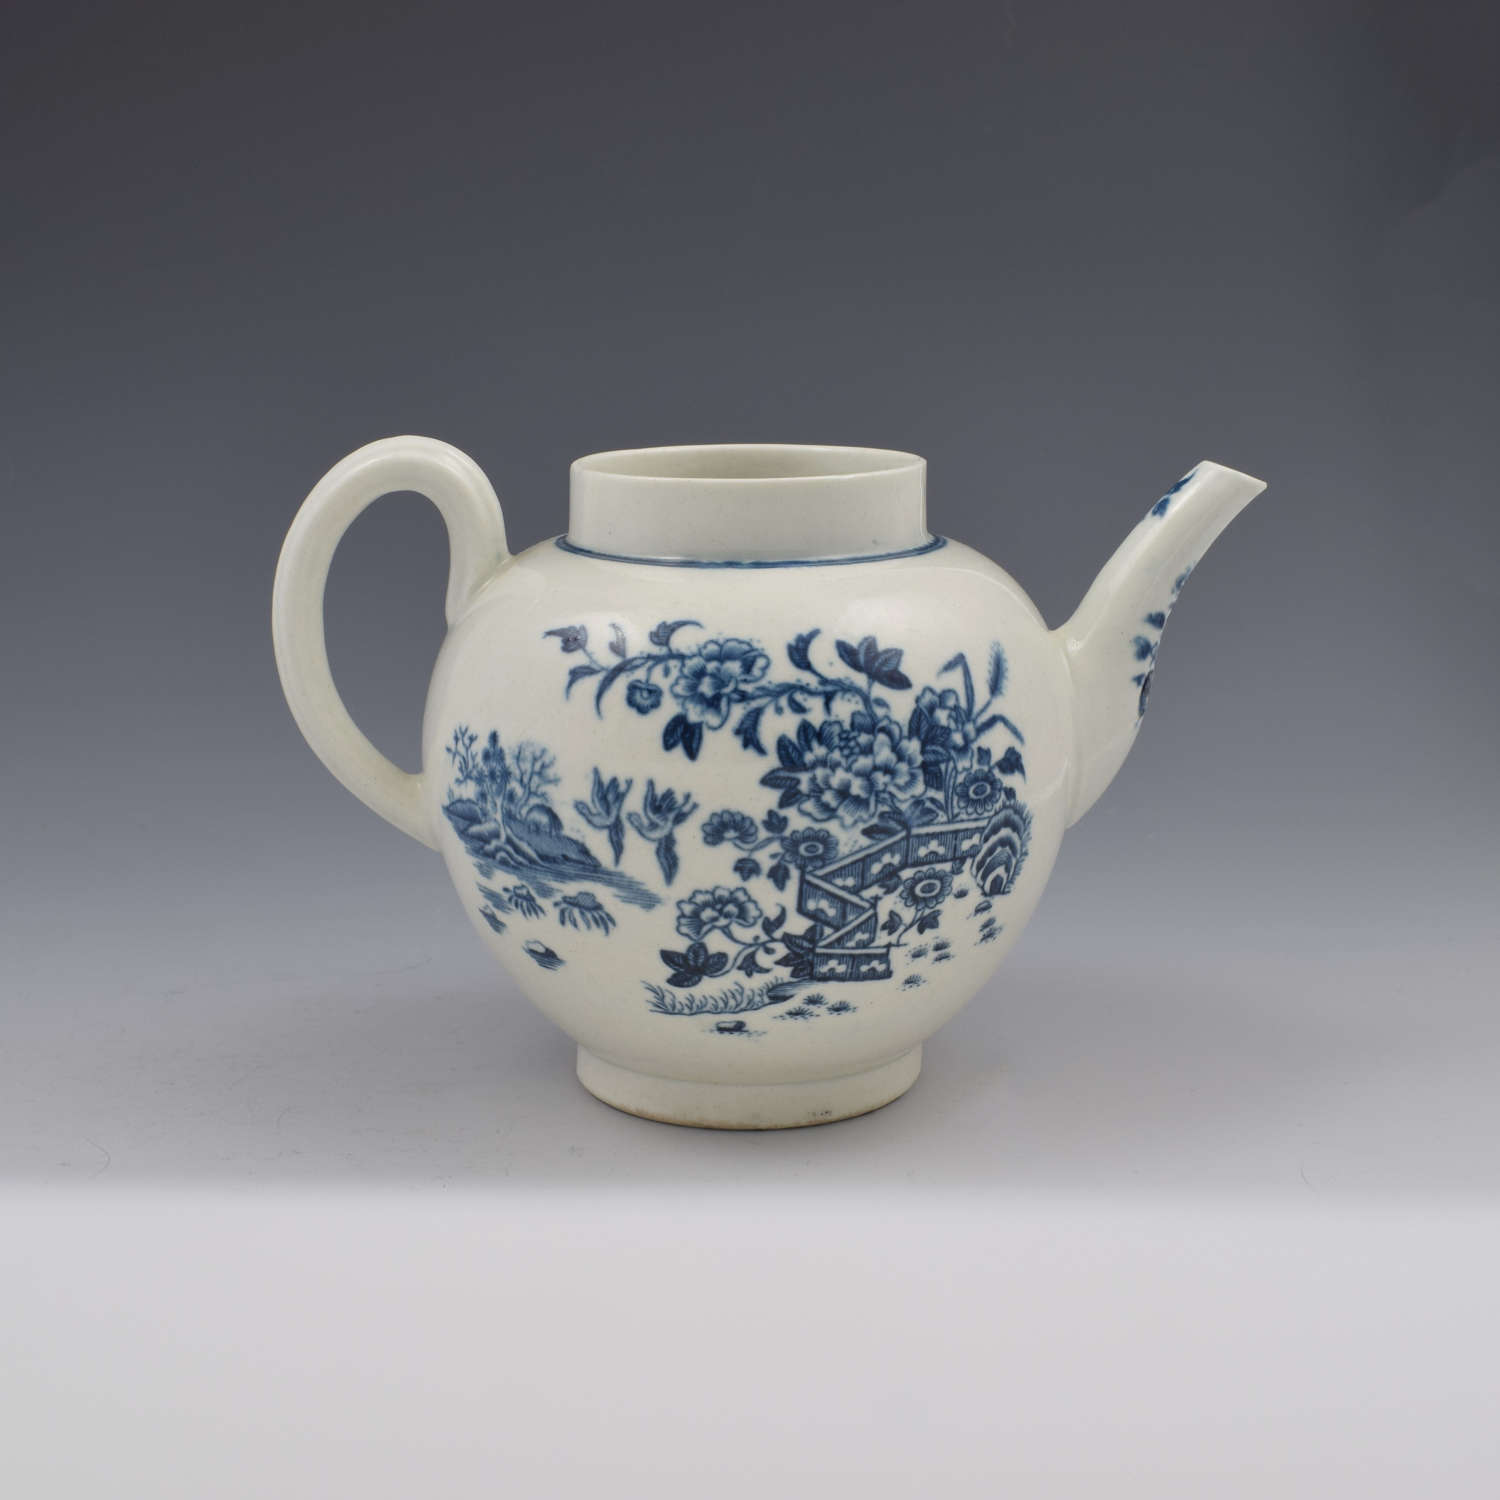 First Period Worcester Porcelain Fence Pattern Teapot c.1770